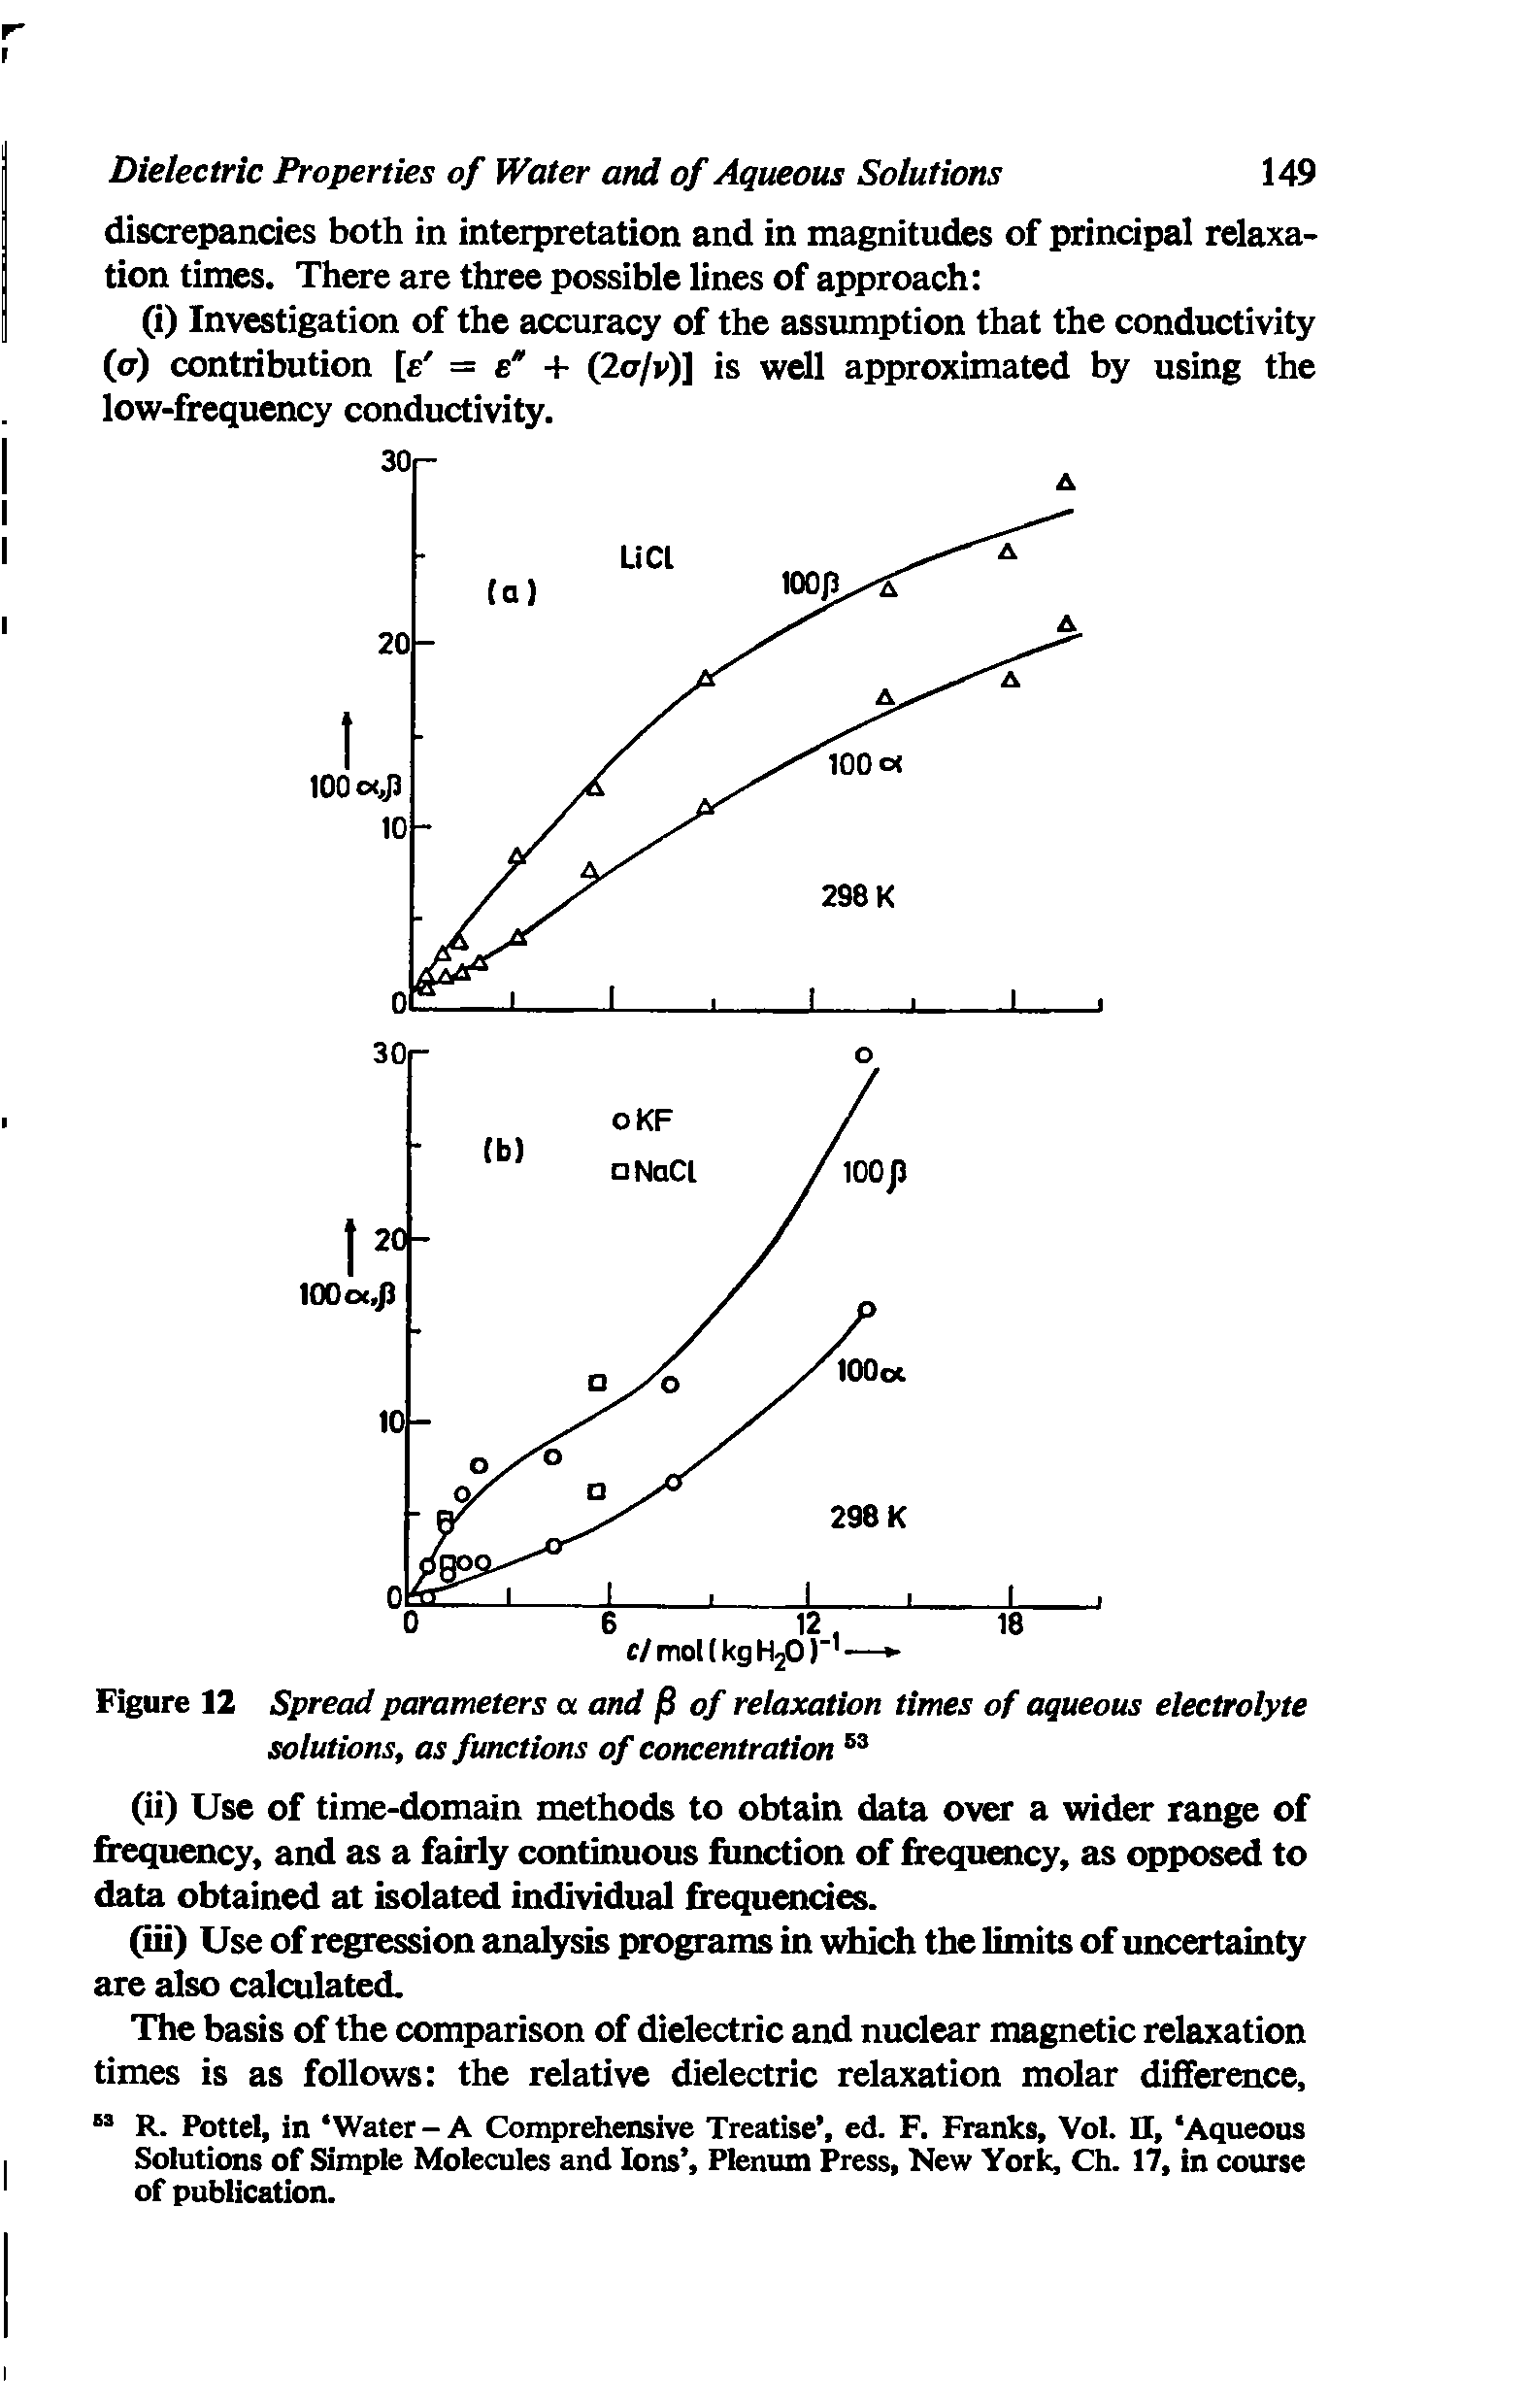 Figure 12 Spread parameters a. and /3 of relaxation times of aqueous electrolyte solutions, as functions of concentration...